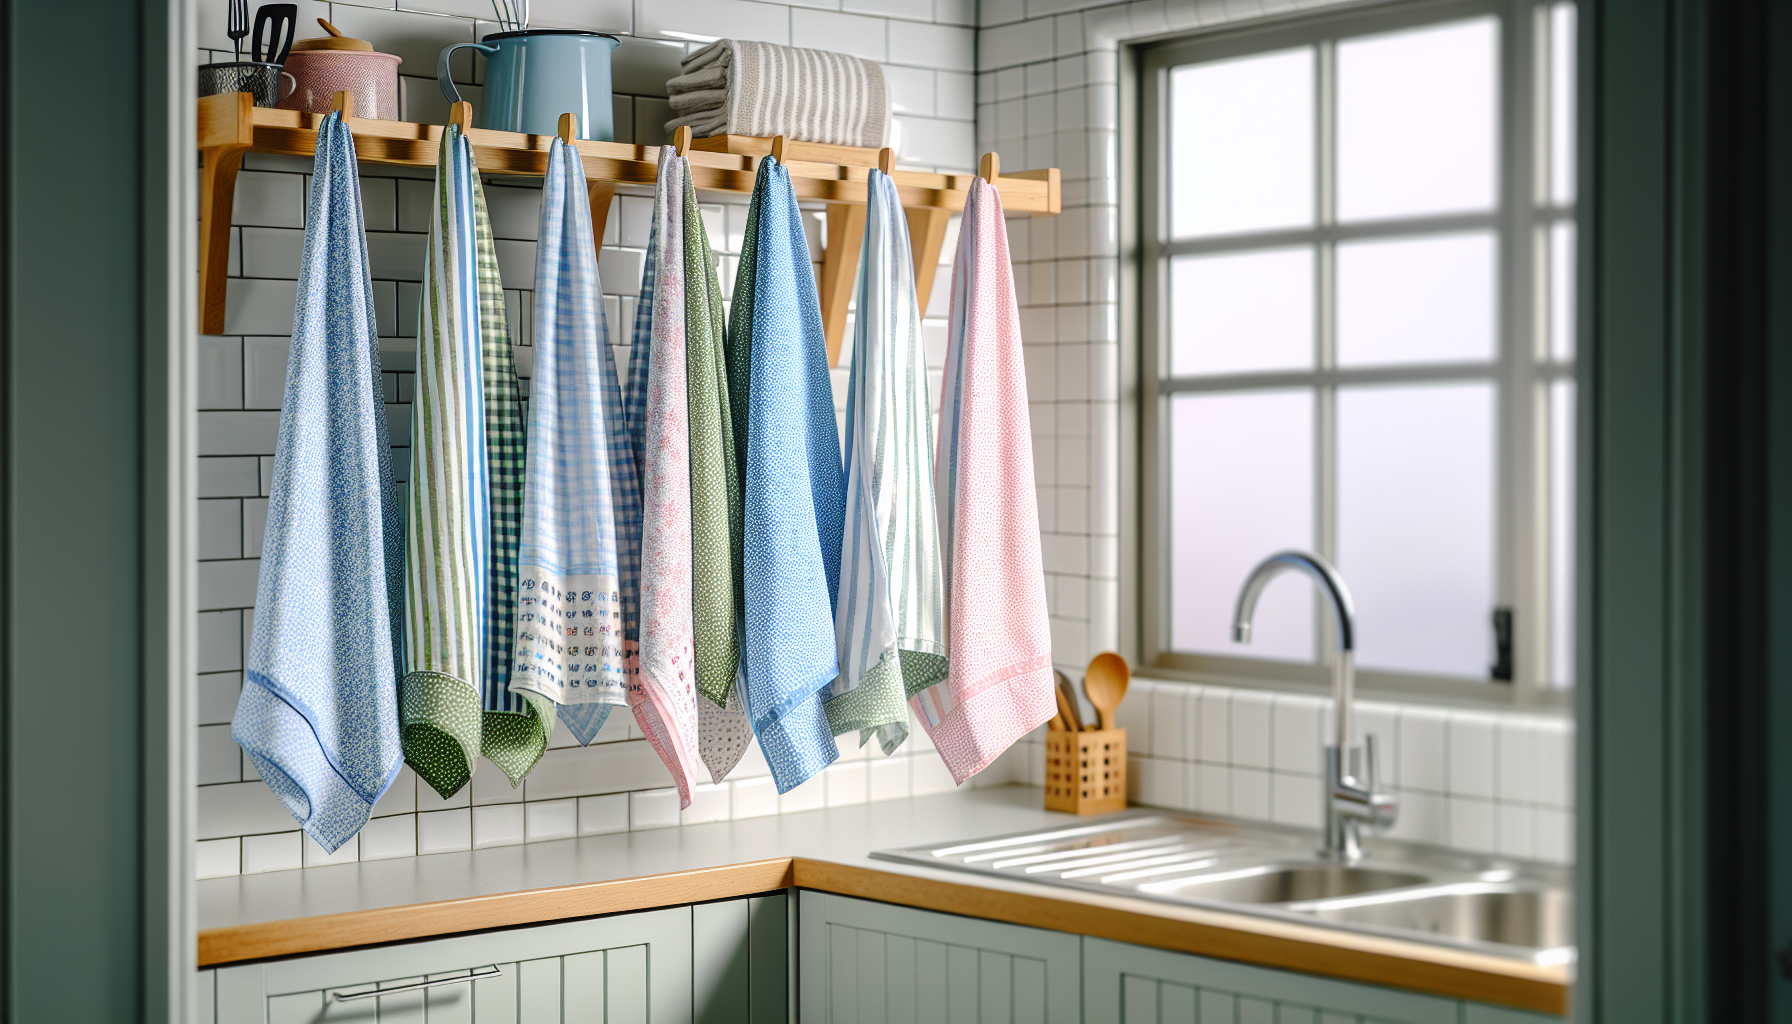 Tea towels hanging in a kitchen